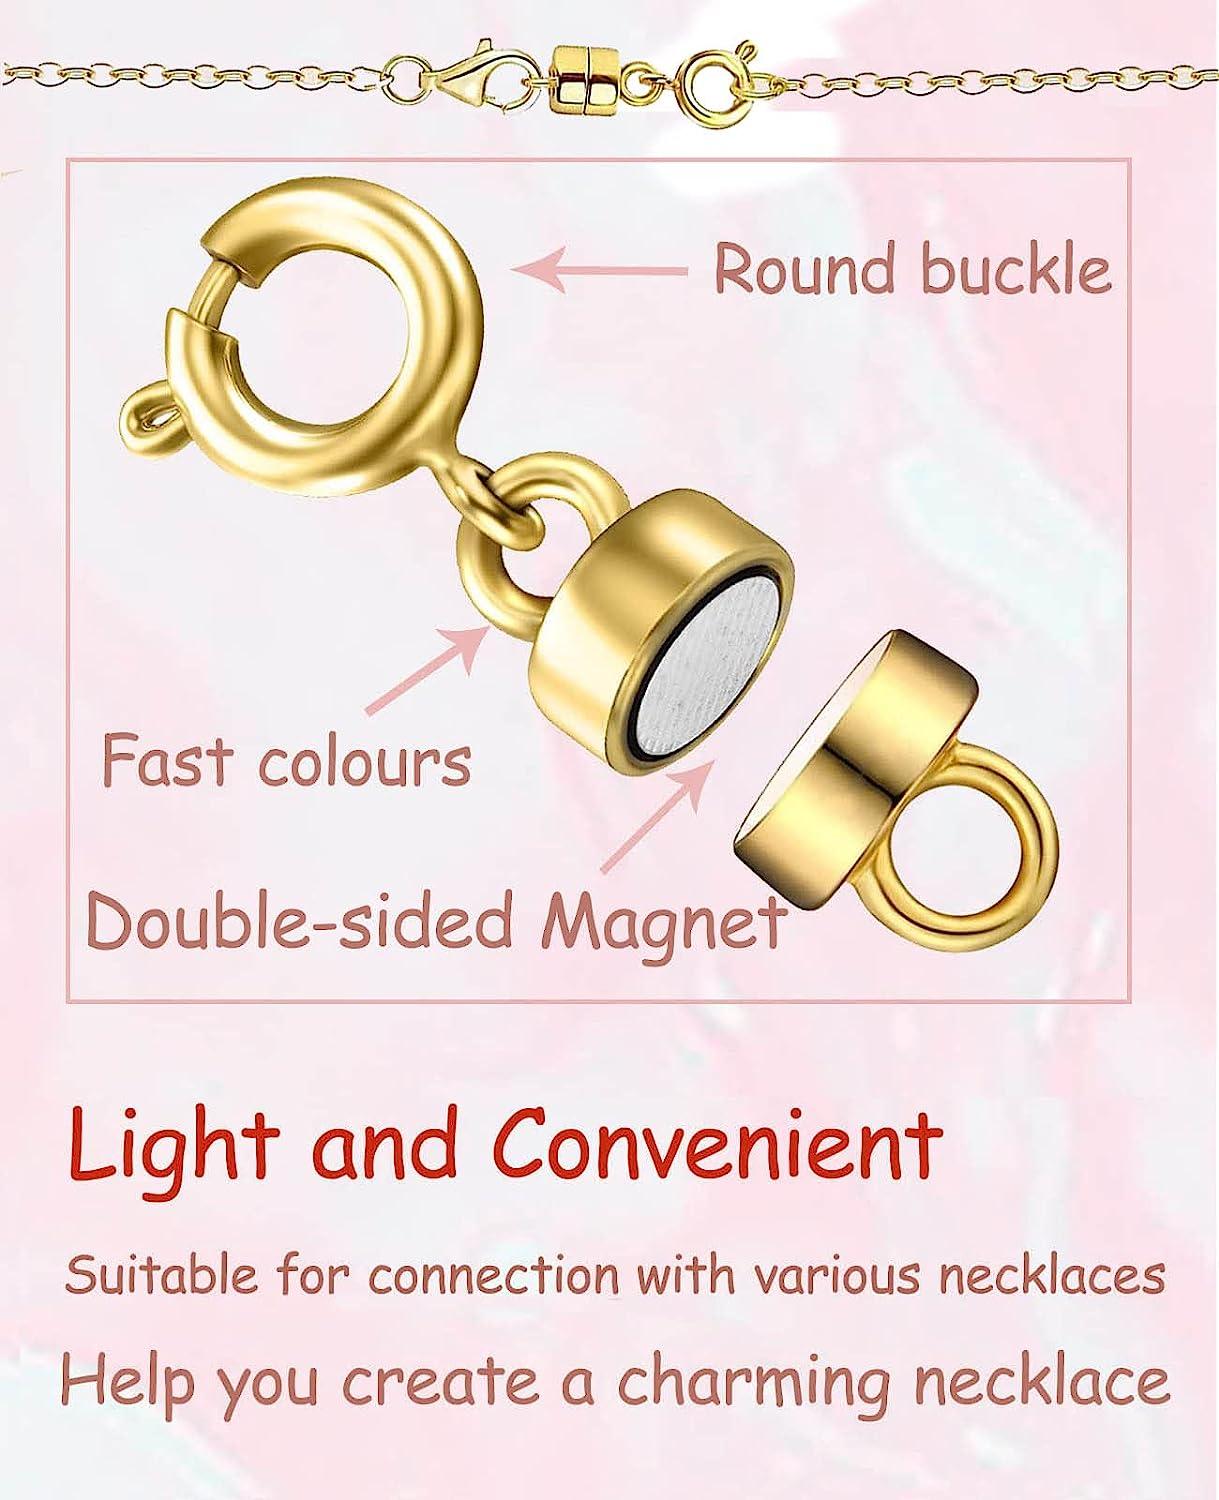 Clysoru Magnetic Necklace Clasps and Closures 14k Gold and Silver Beads  Chain Extender Necklaces Bracelet Safety Magnetic Locking Jewelry Clasp  Converter(4 Gold 4 Silver) 8pcs - 4 gold and 4 silver